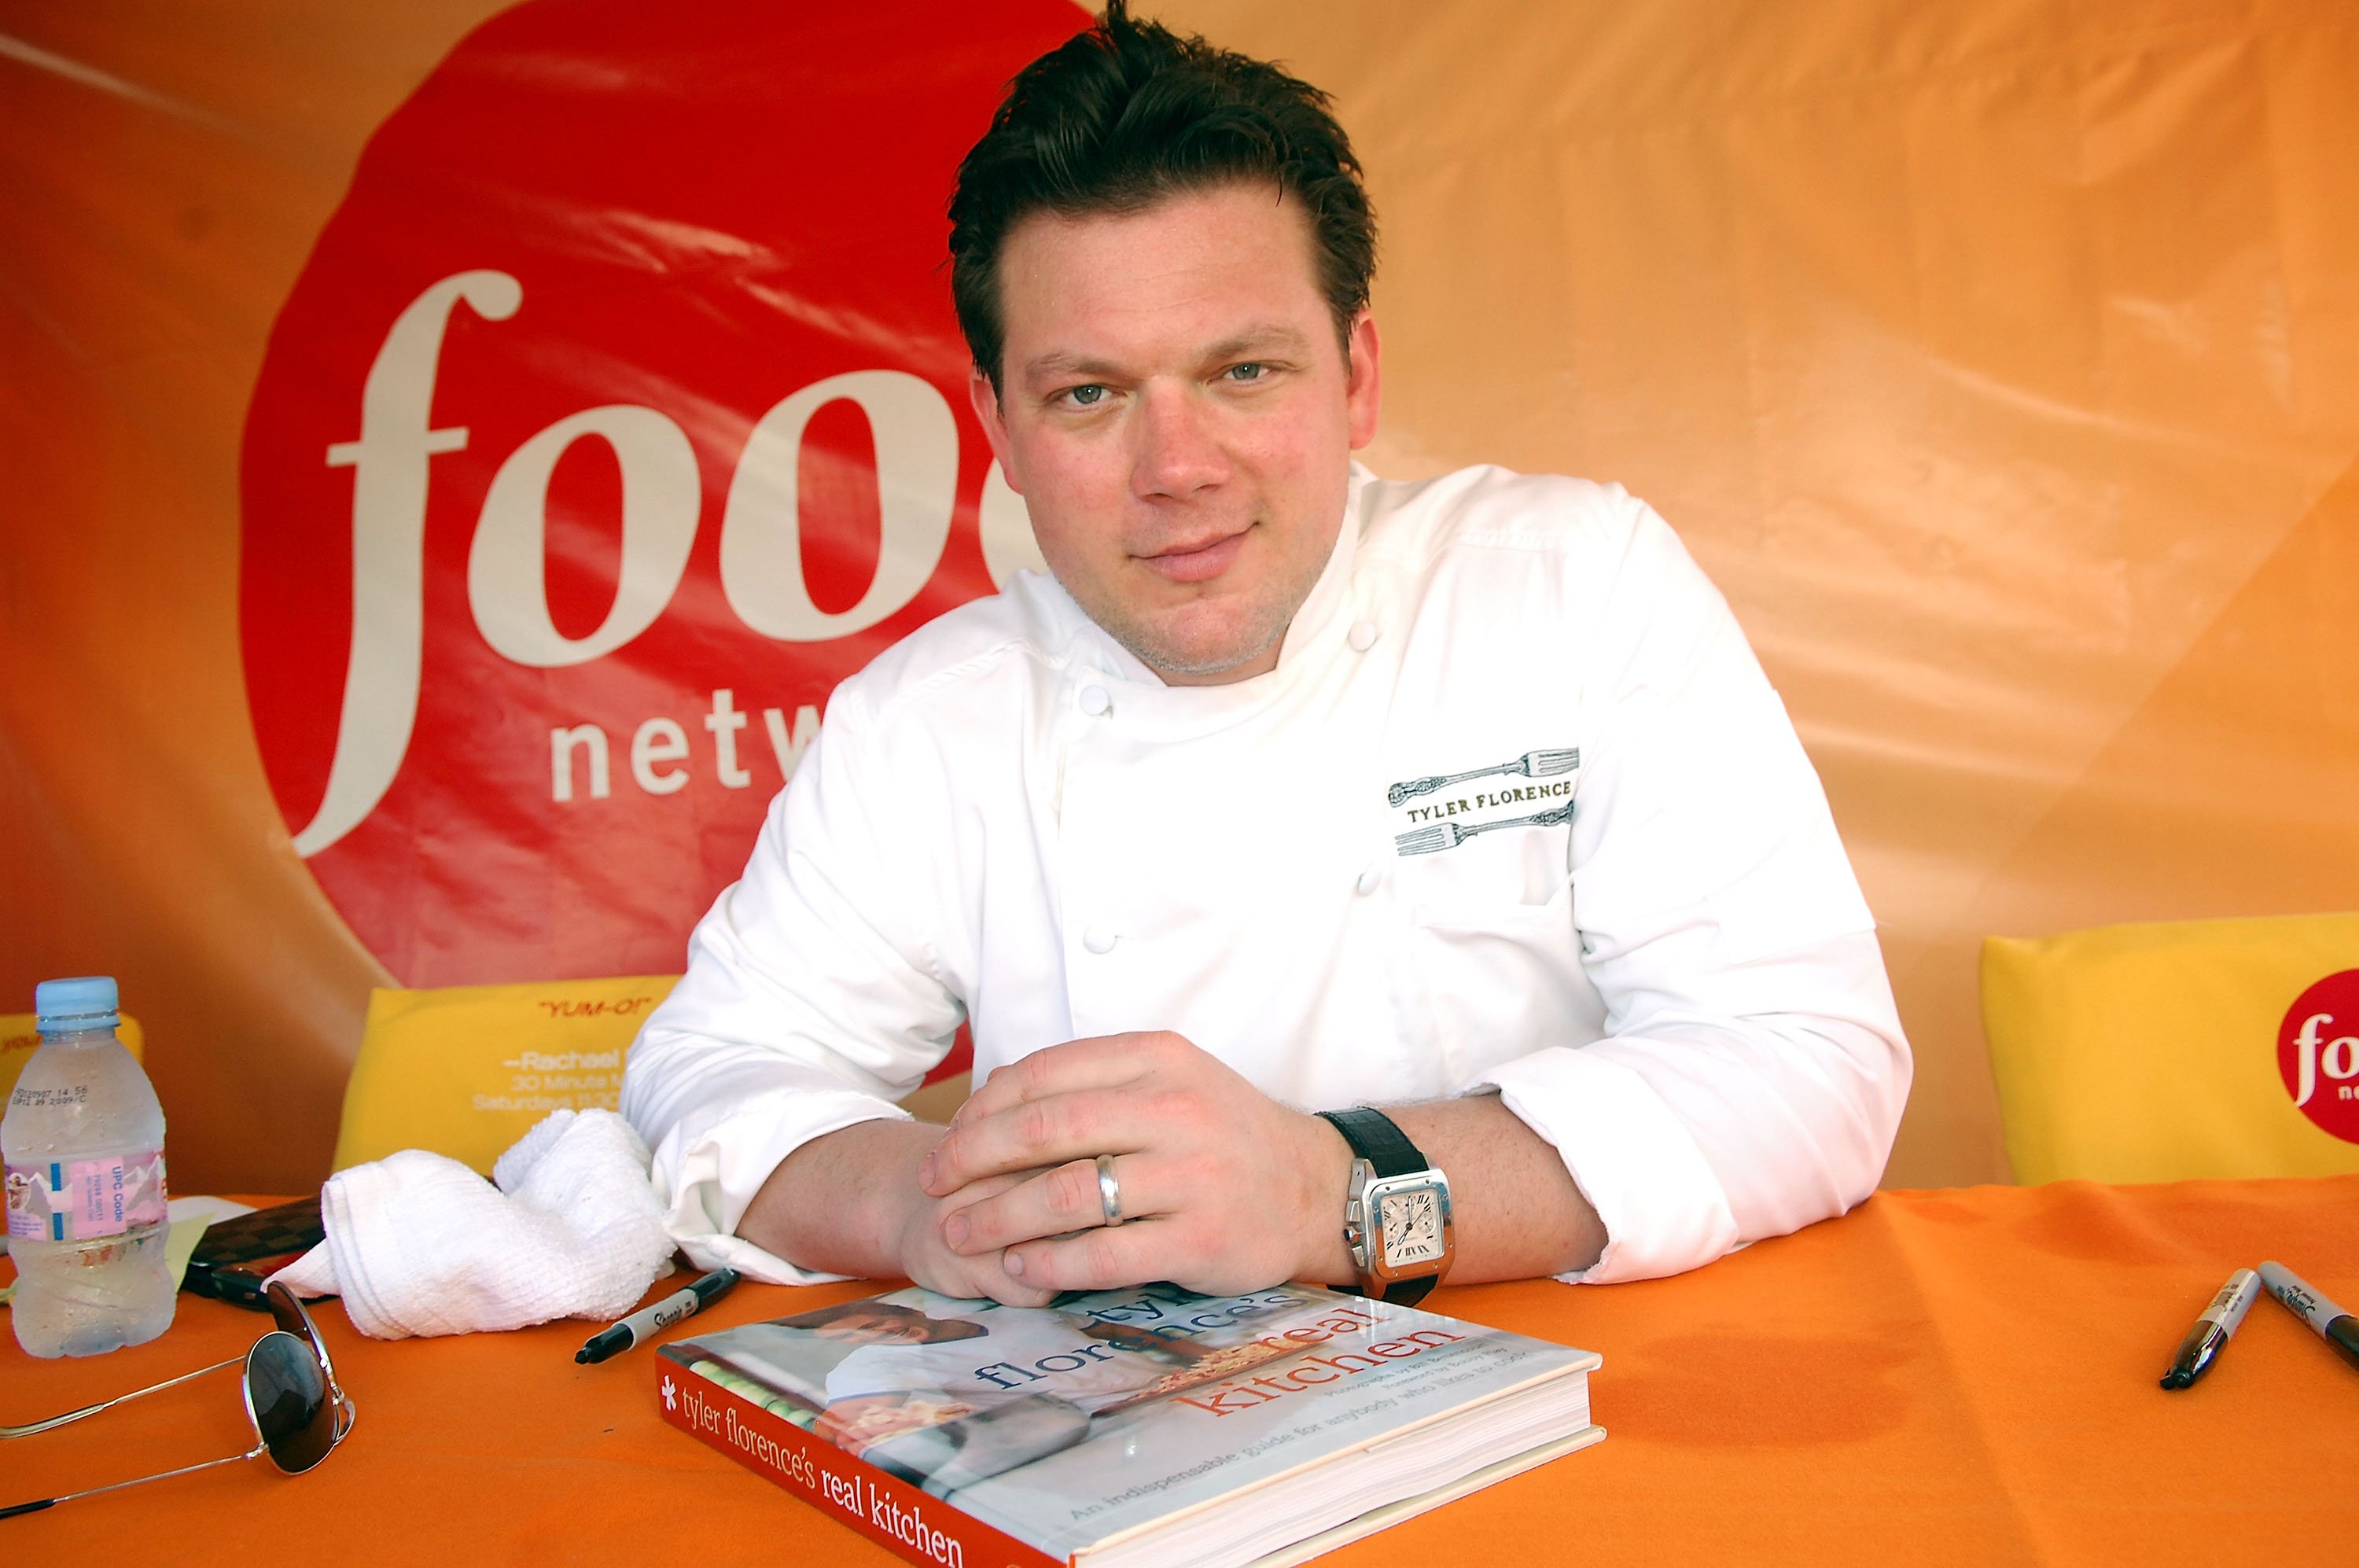 Tyler Florence signs books at the South Beach Wine and Food Festival on February 23, 2008 in Miami Beach, Florida